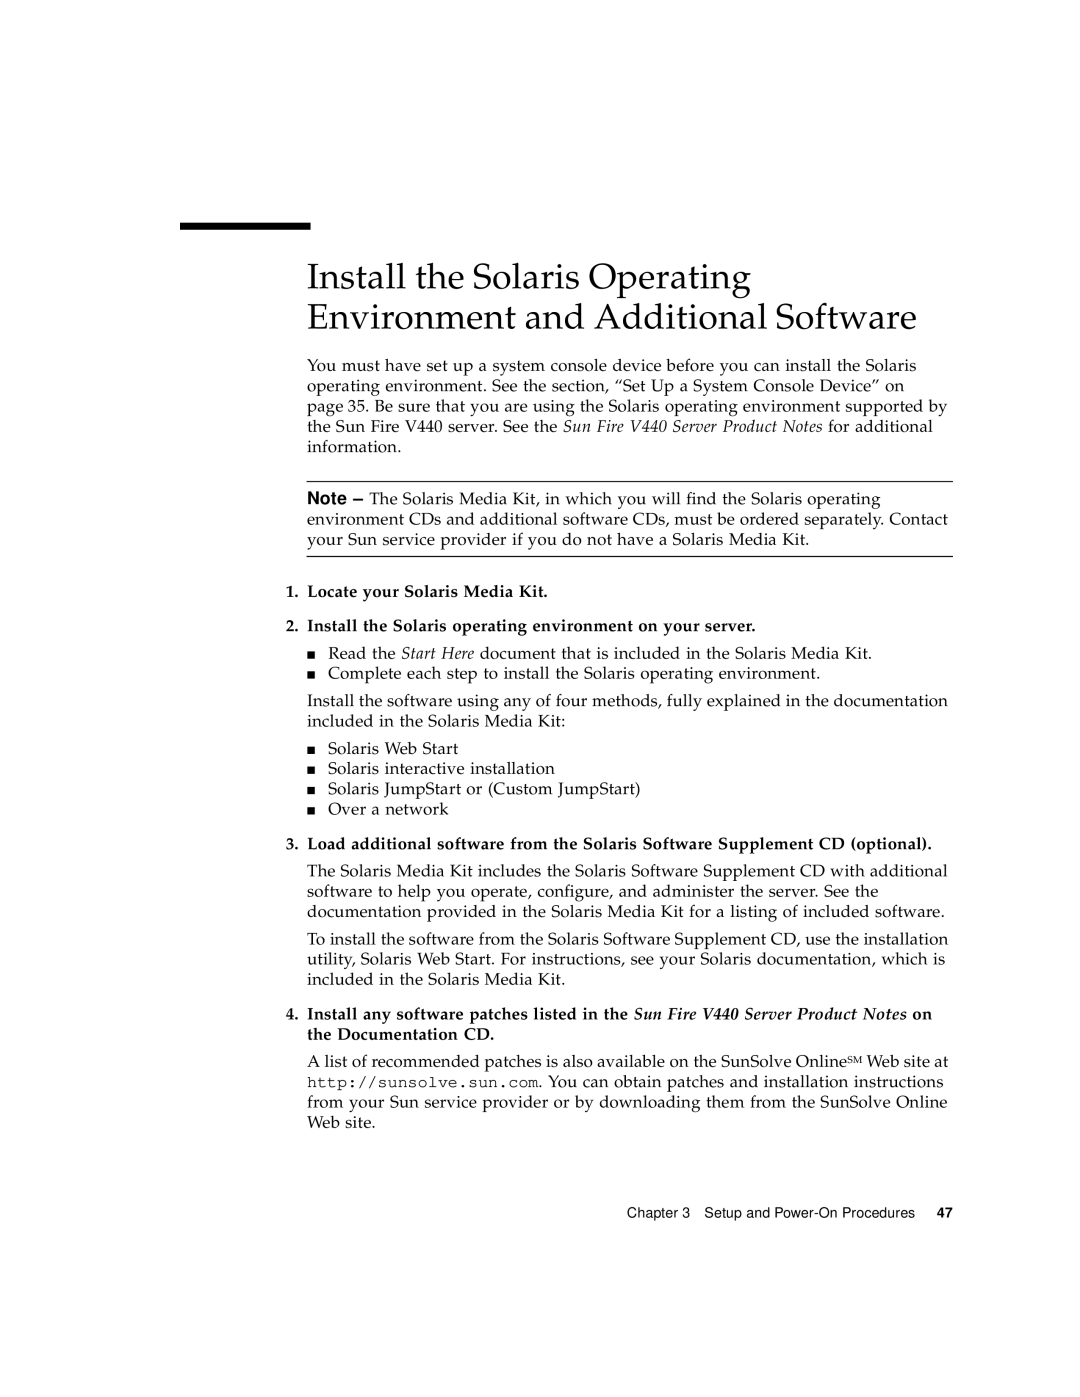 Sun Microsystems 816-7727-10 manual Install the Solaris Operating Environment and Additional Software 